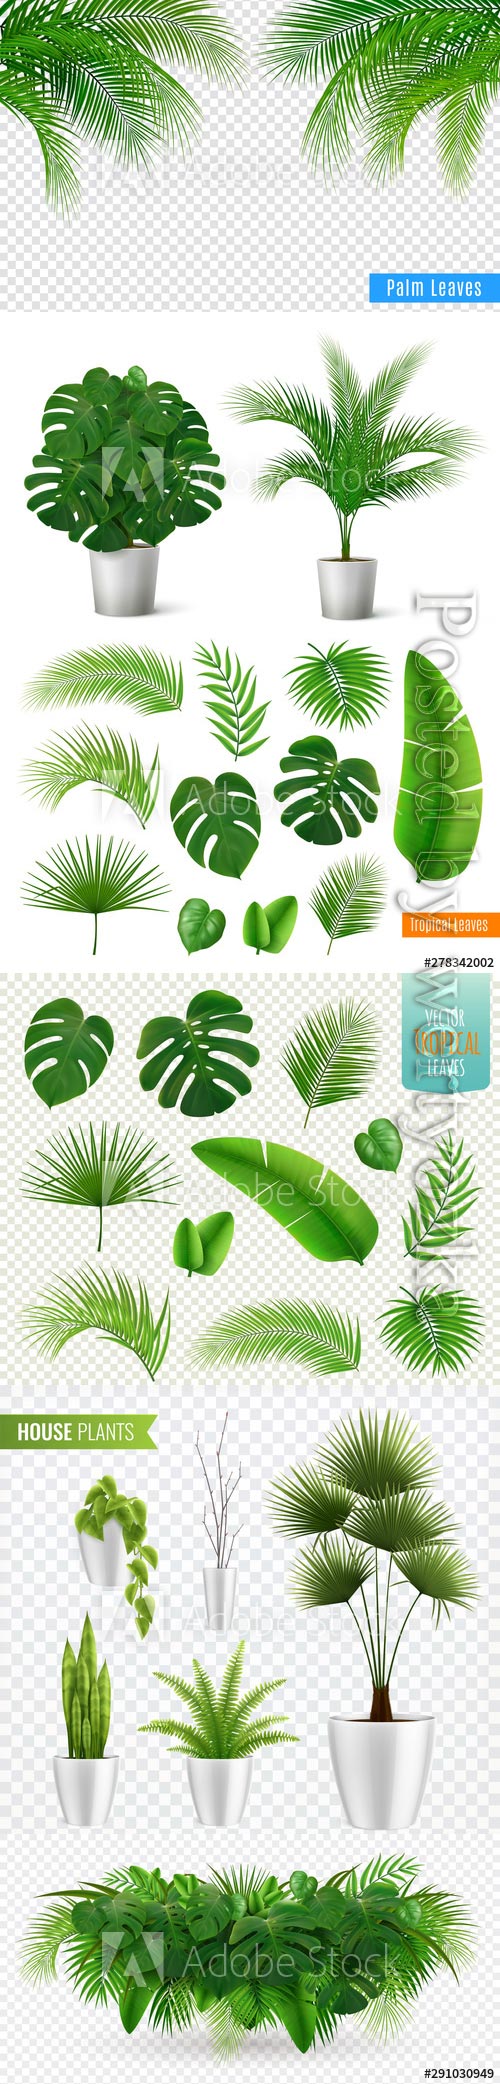 Tropical leaves realistic composition vector illustrations